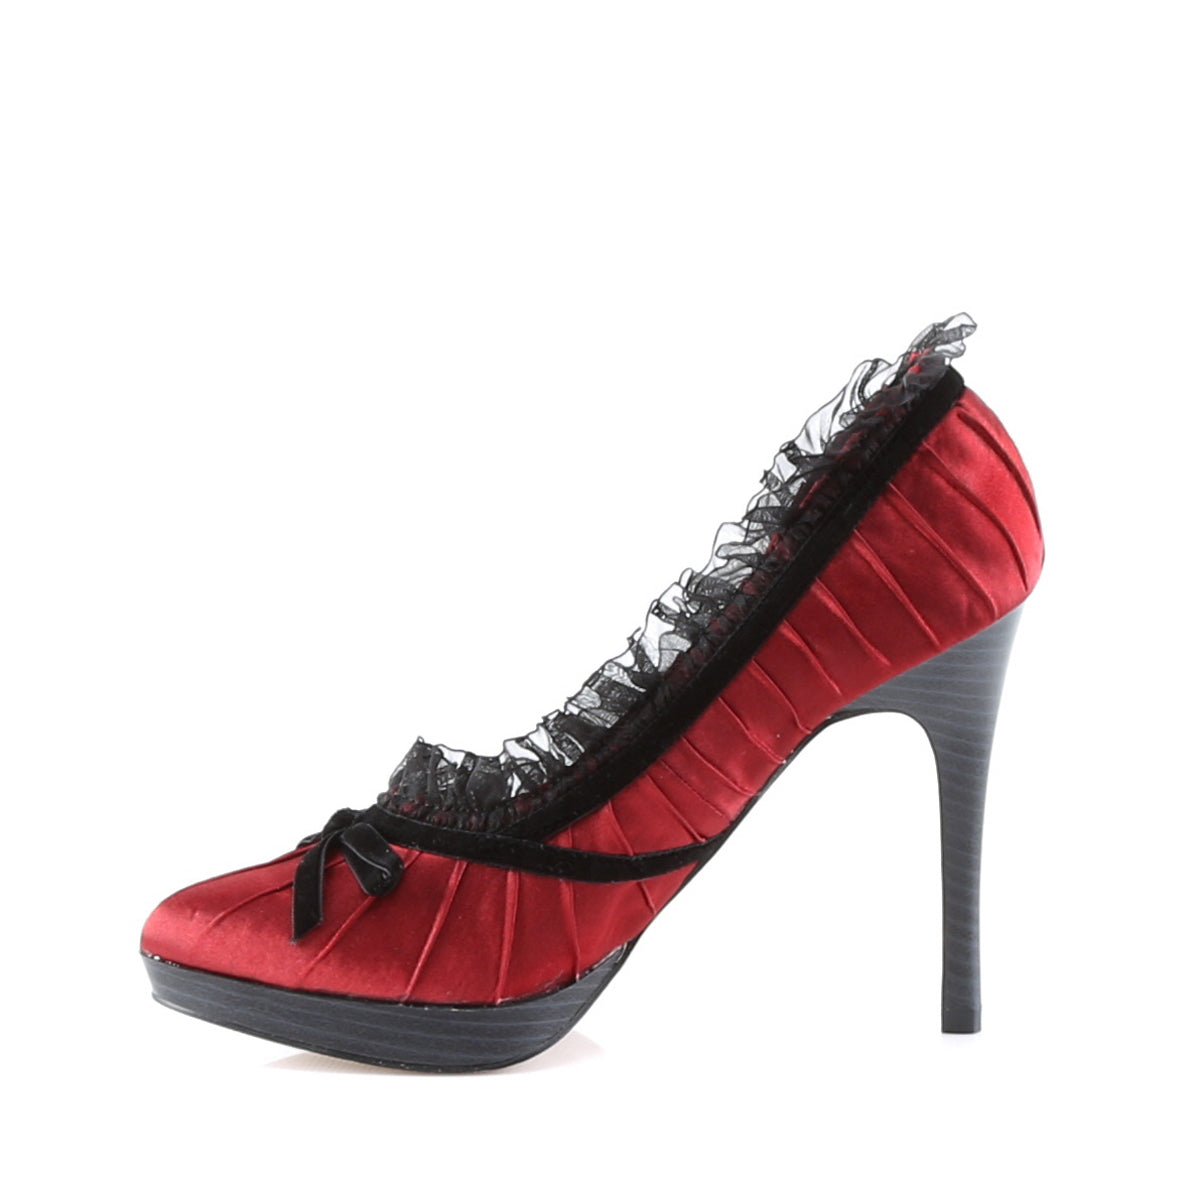 Pin Up Couture Womens Pumps BLISS-38 Red-Blk Satin